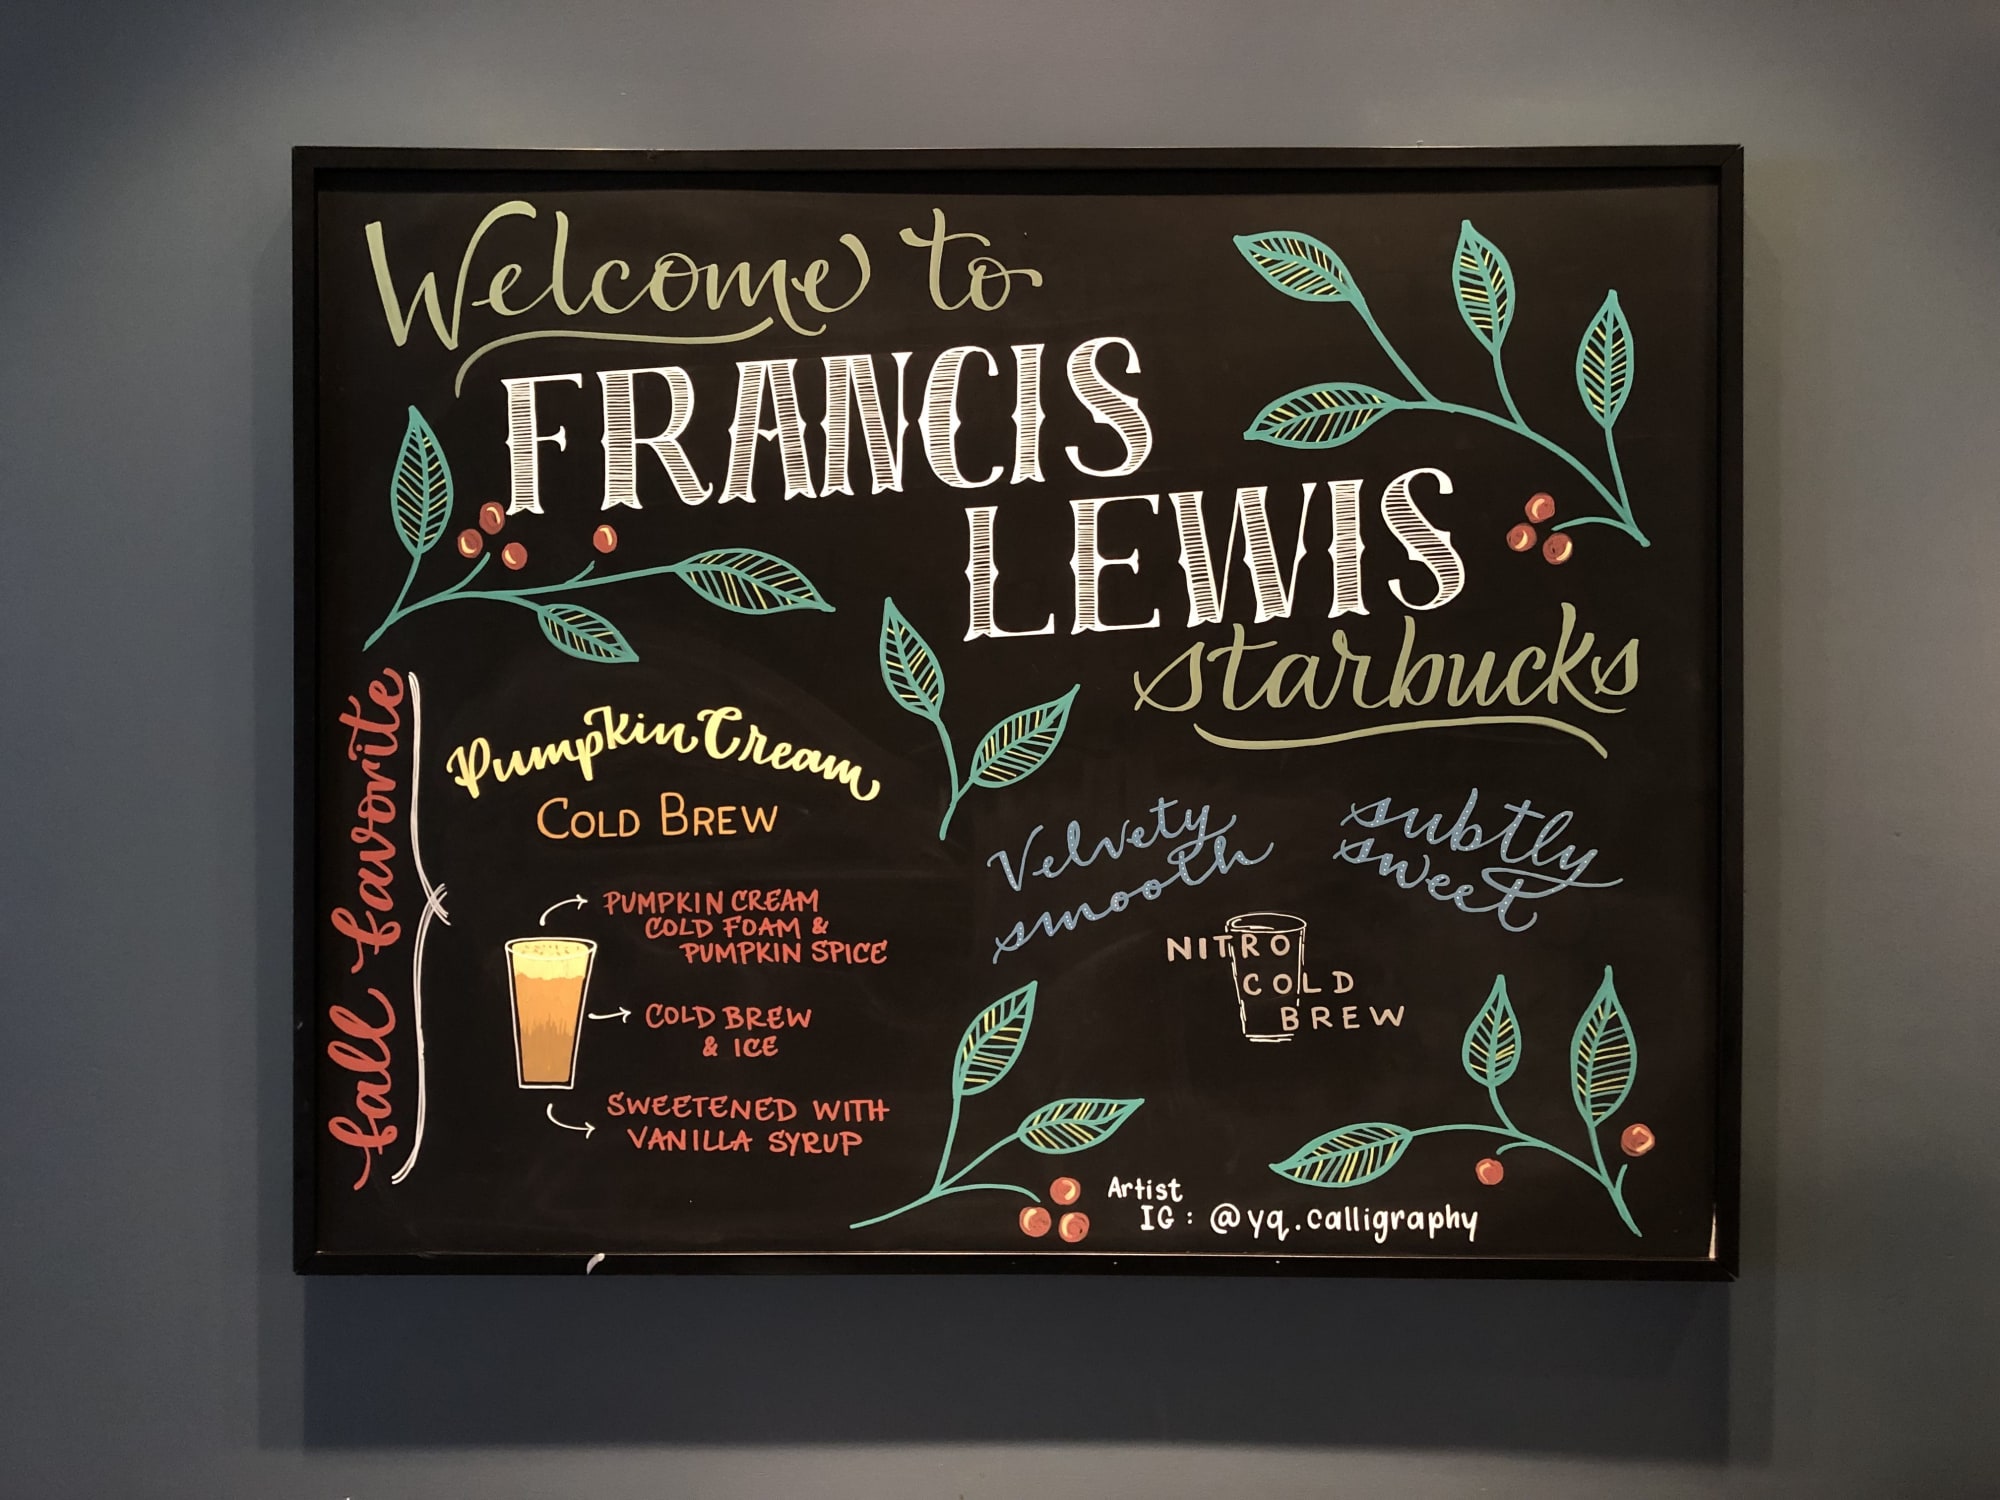 Chalkboard Art By Yq Design Seen At Starbucks Queens Wescover